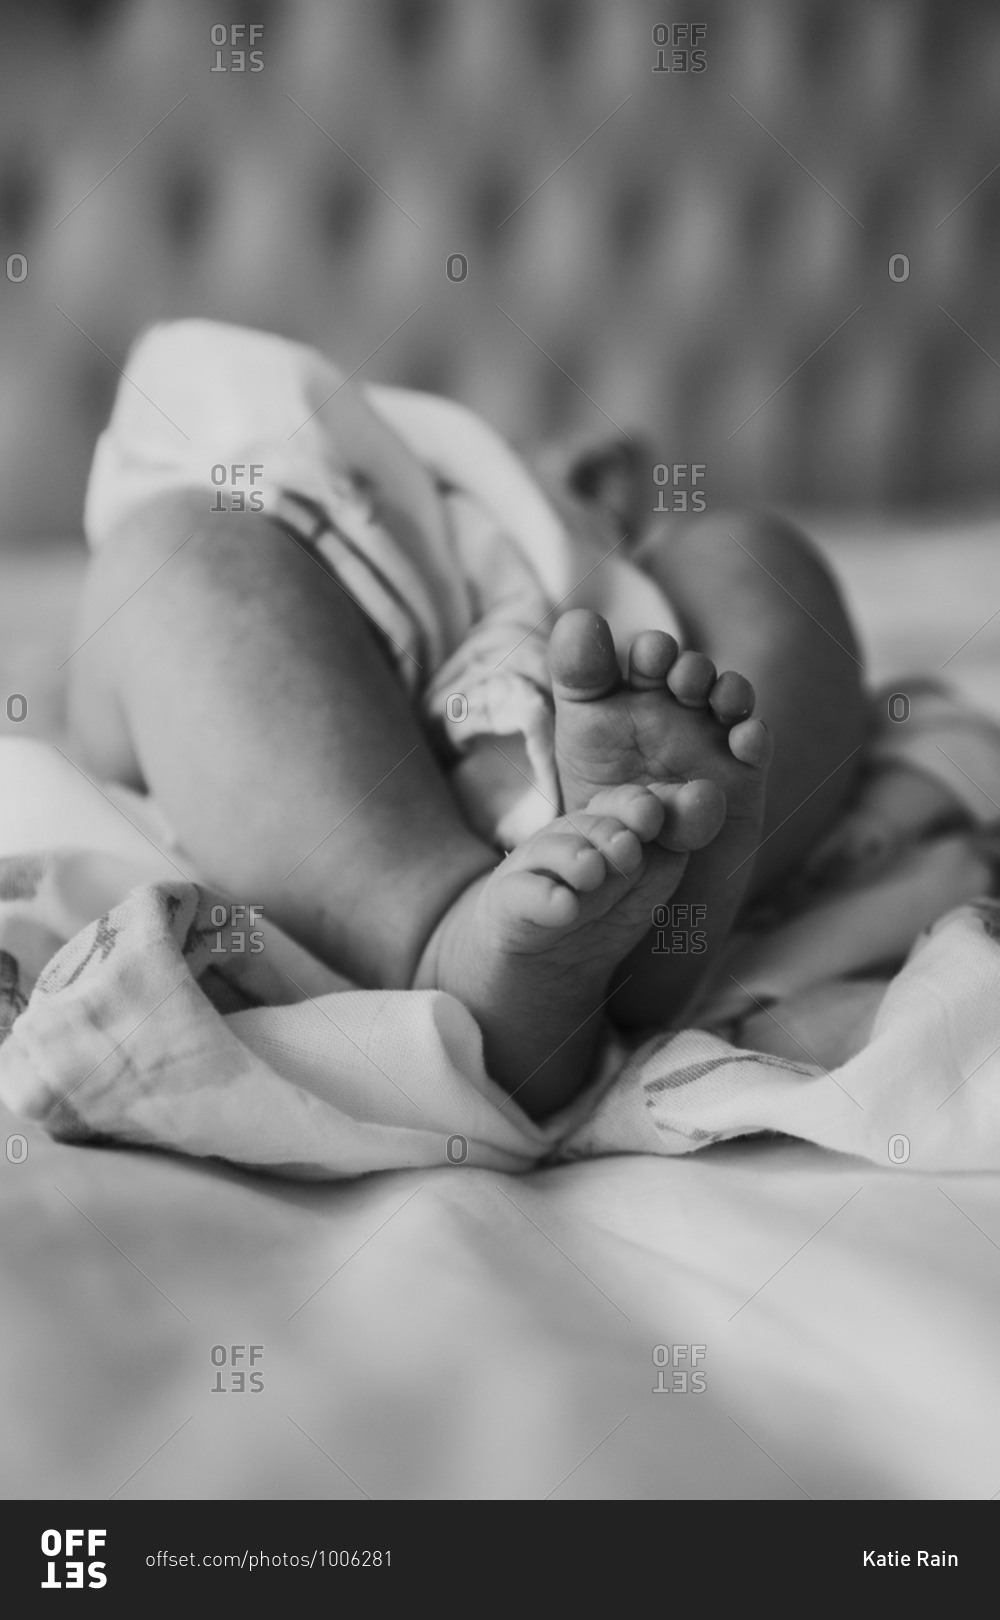 Baby feet and legs wrapped around sheets in black and white